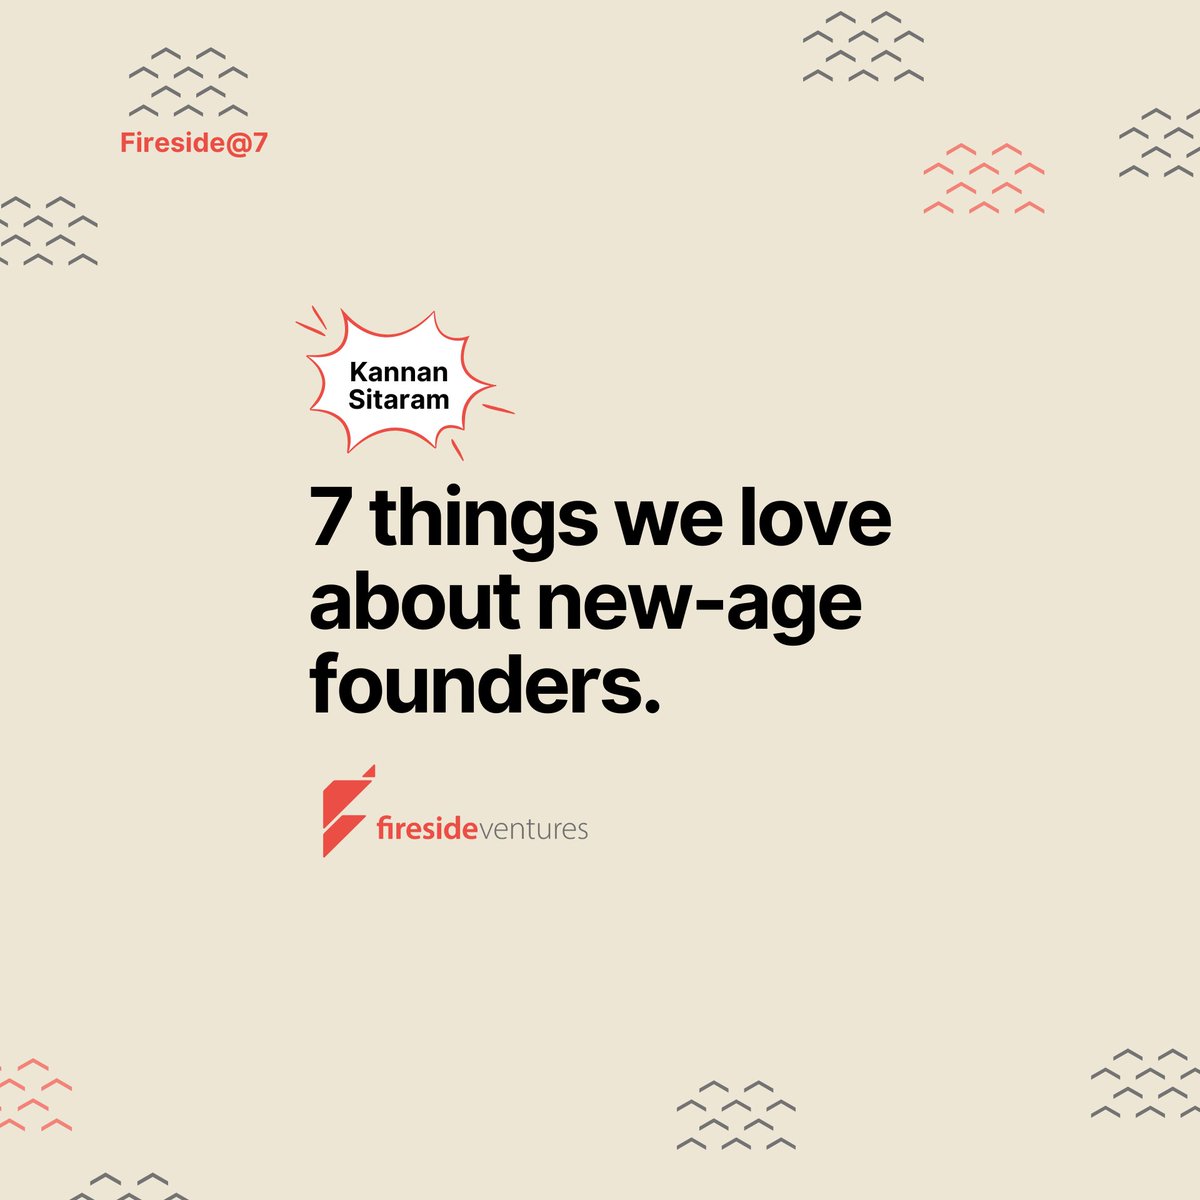 It's a new week, but here at @firesideventure it's also a whole new year! We just turned 7 yesterday 🎂🎉🎈 So here are 7 things we love about new-age founders, by @sitaramvs 
#anniversary #7things #Firesideat7 #FiresideIgnite (1/9)